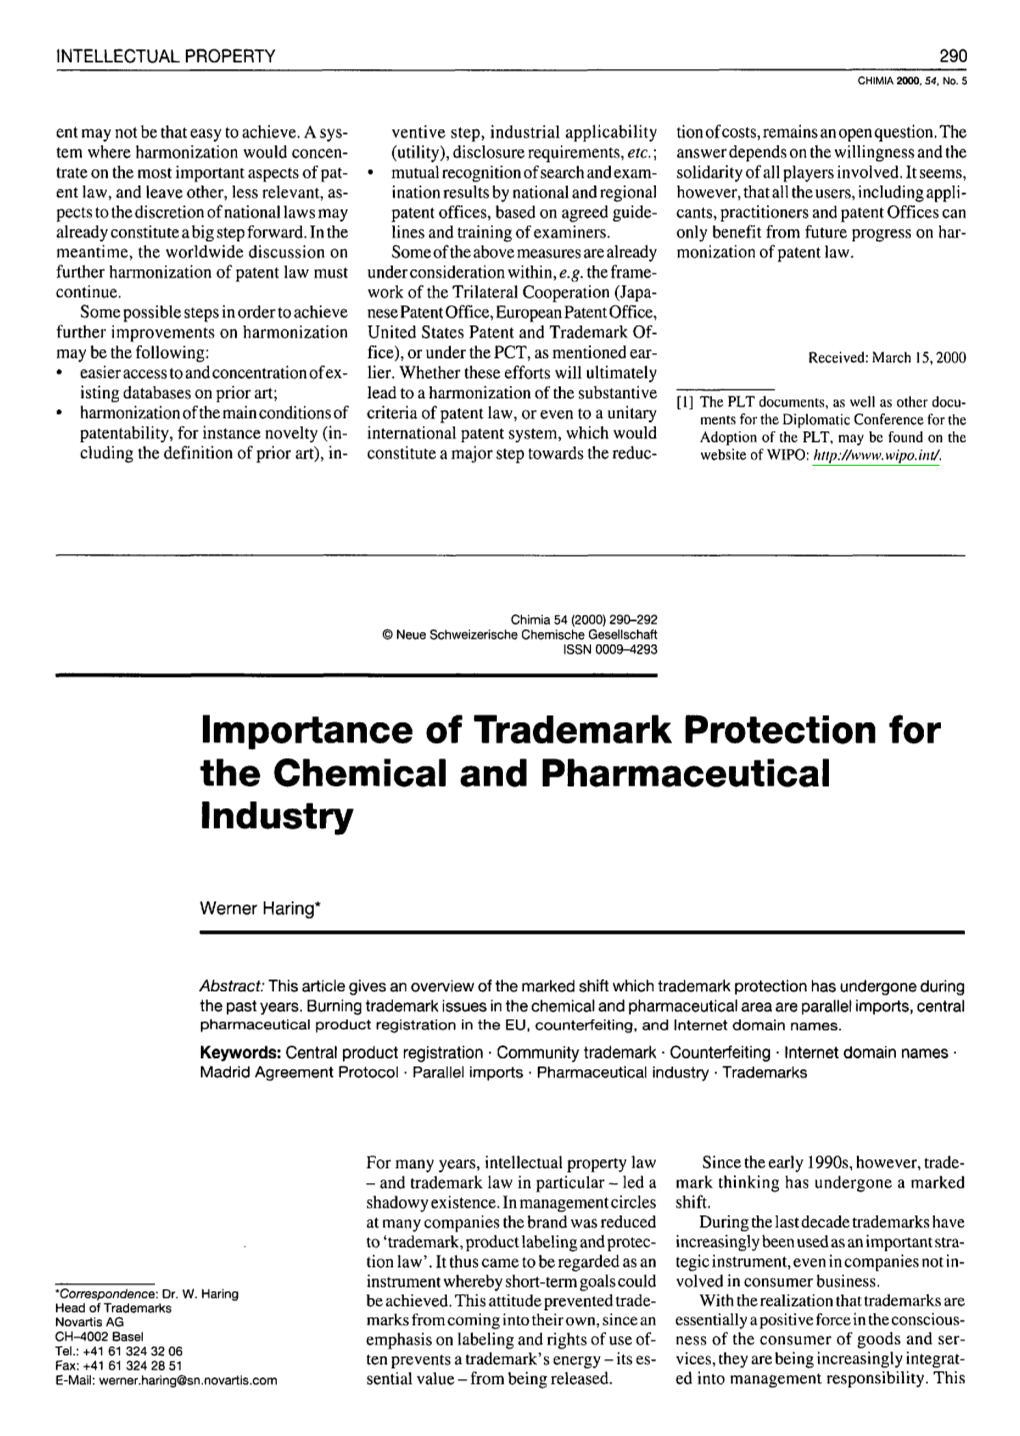 Importance of Trademark Protection for the Chemical and Pharmaceutical Industry